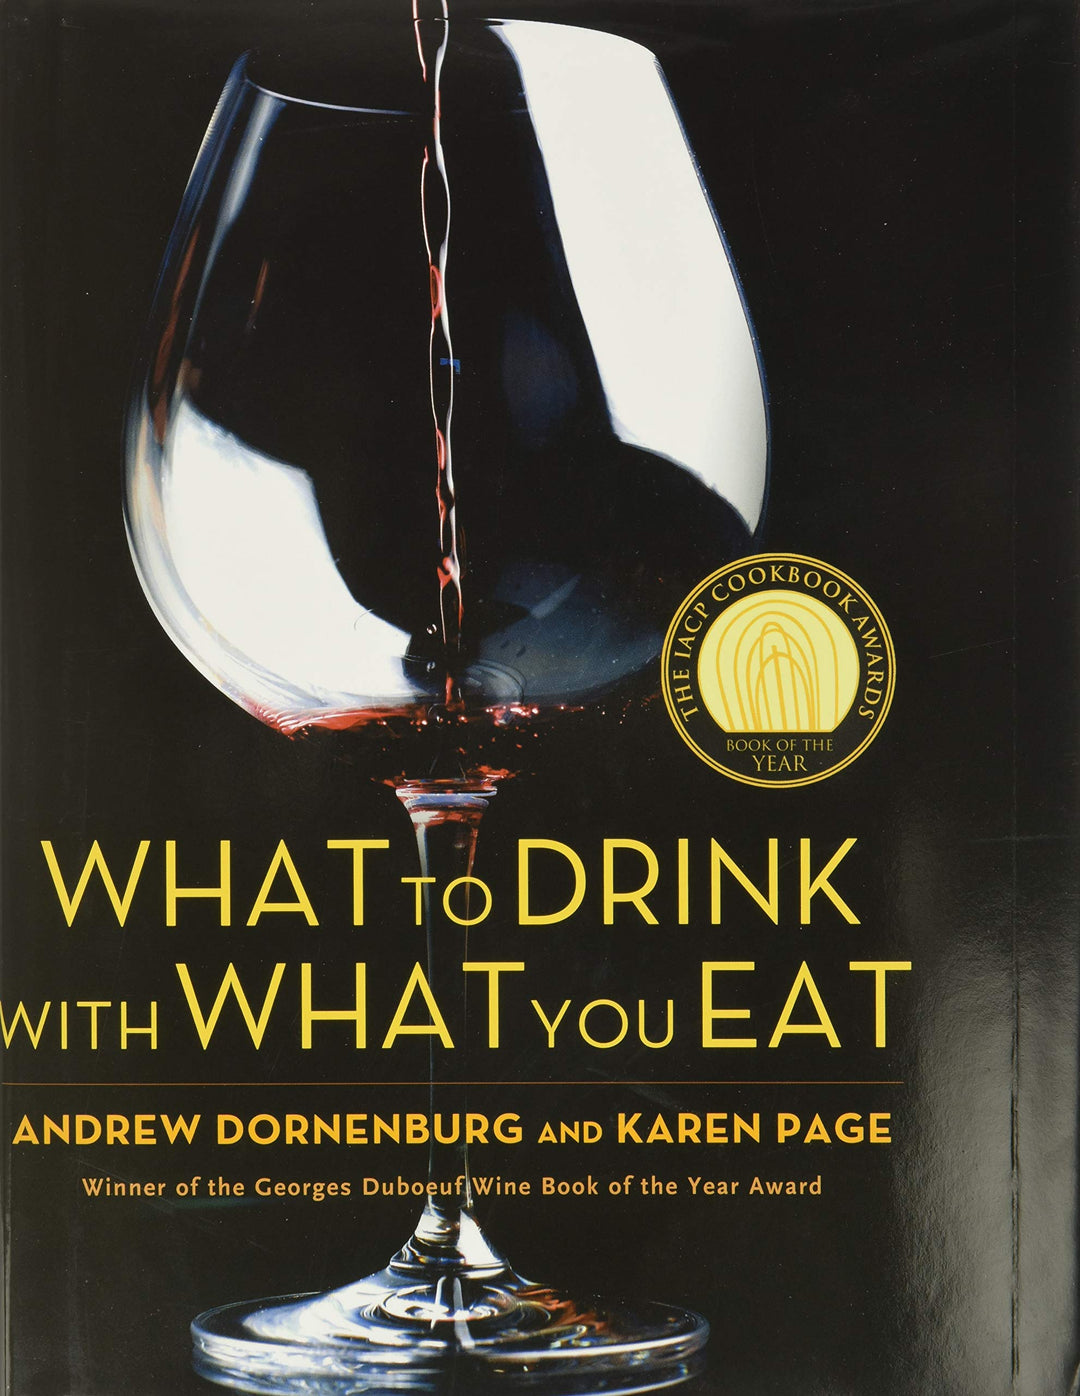 What to Drink with What You Eat - Madison's Niche 